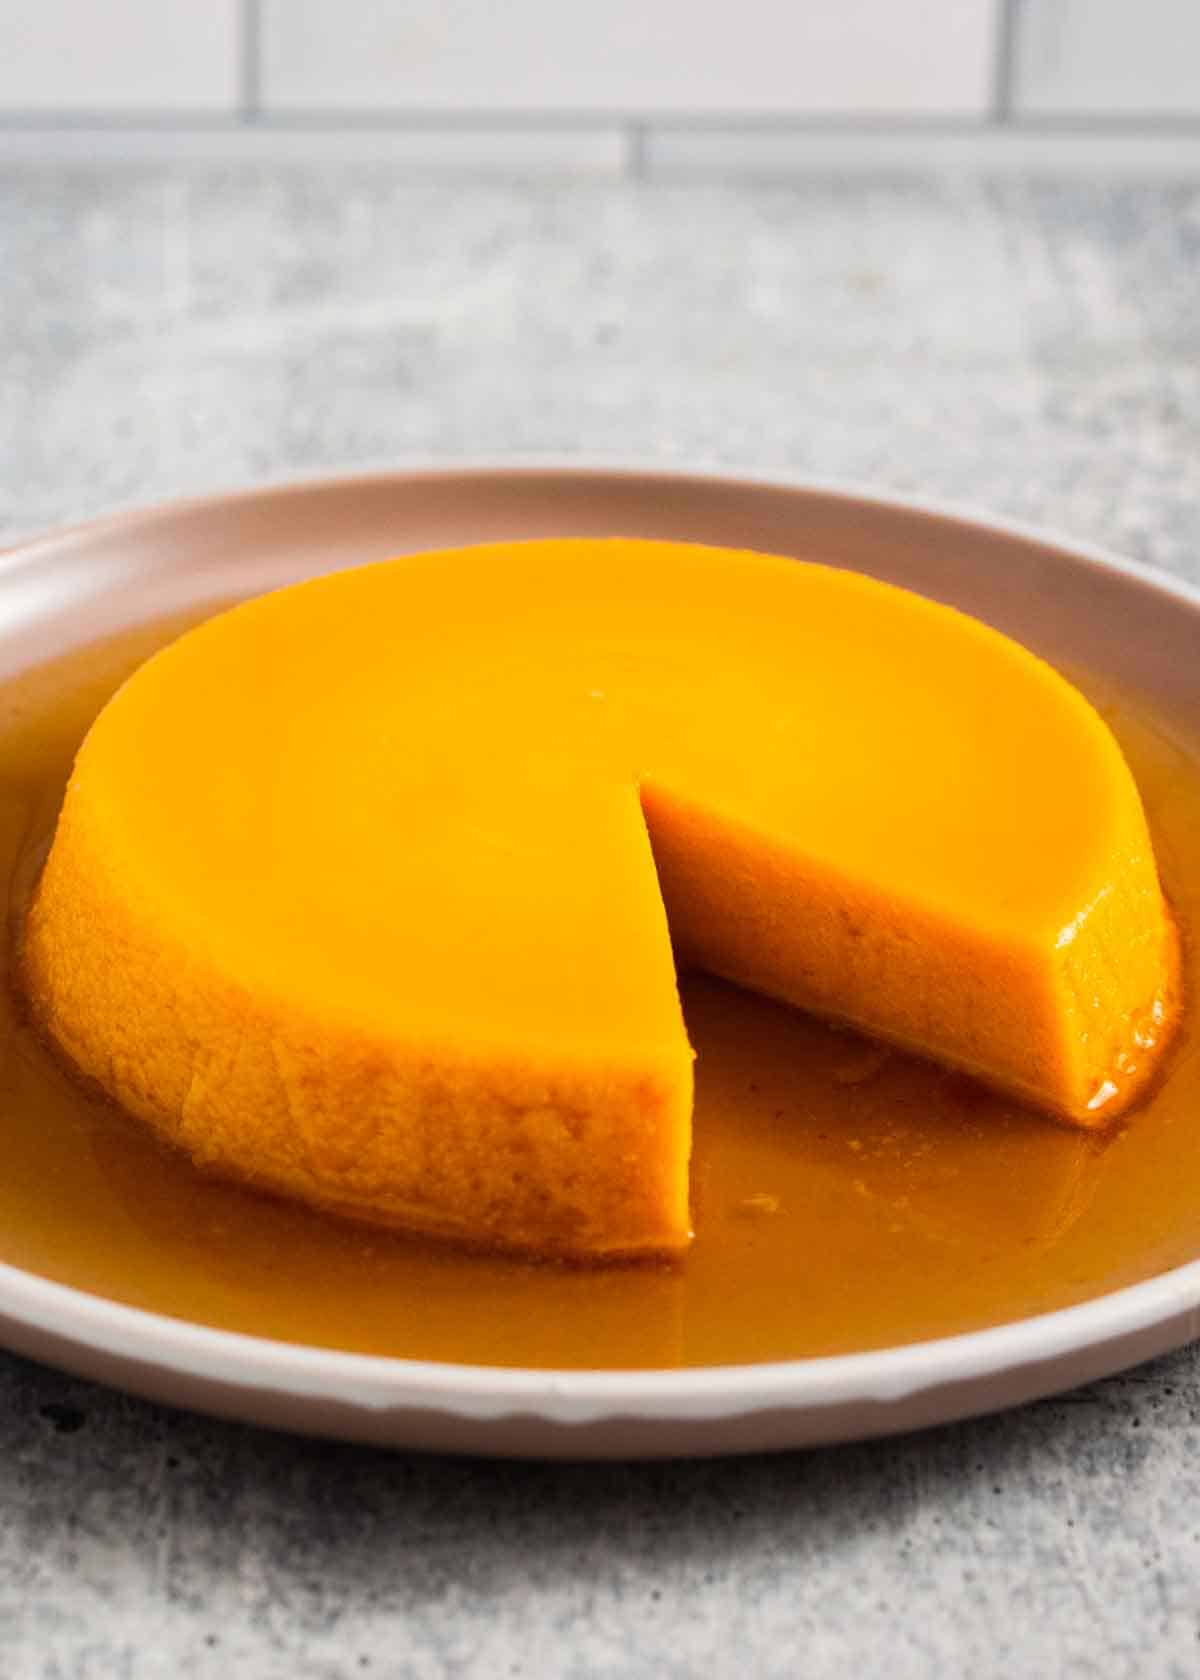 Baked pumpkin flan served on a plate with a slice taken out.